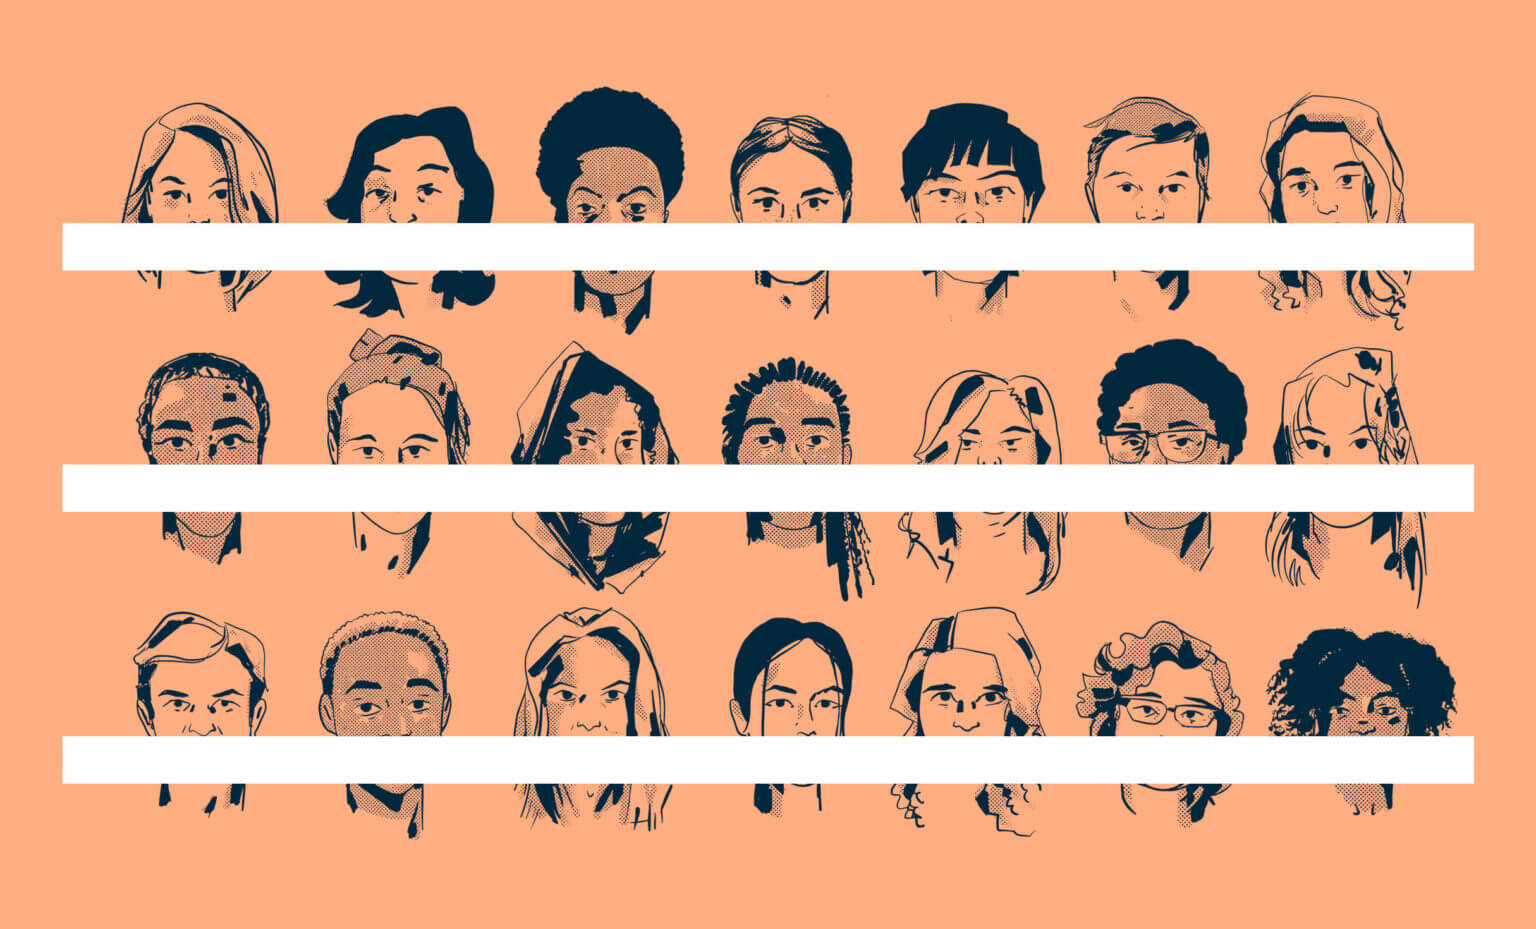 An illustration of female presenting people with a white bar over their mouths